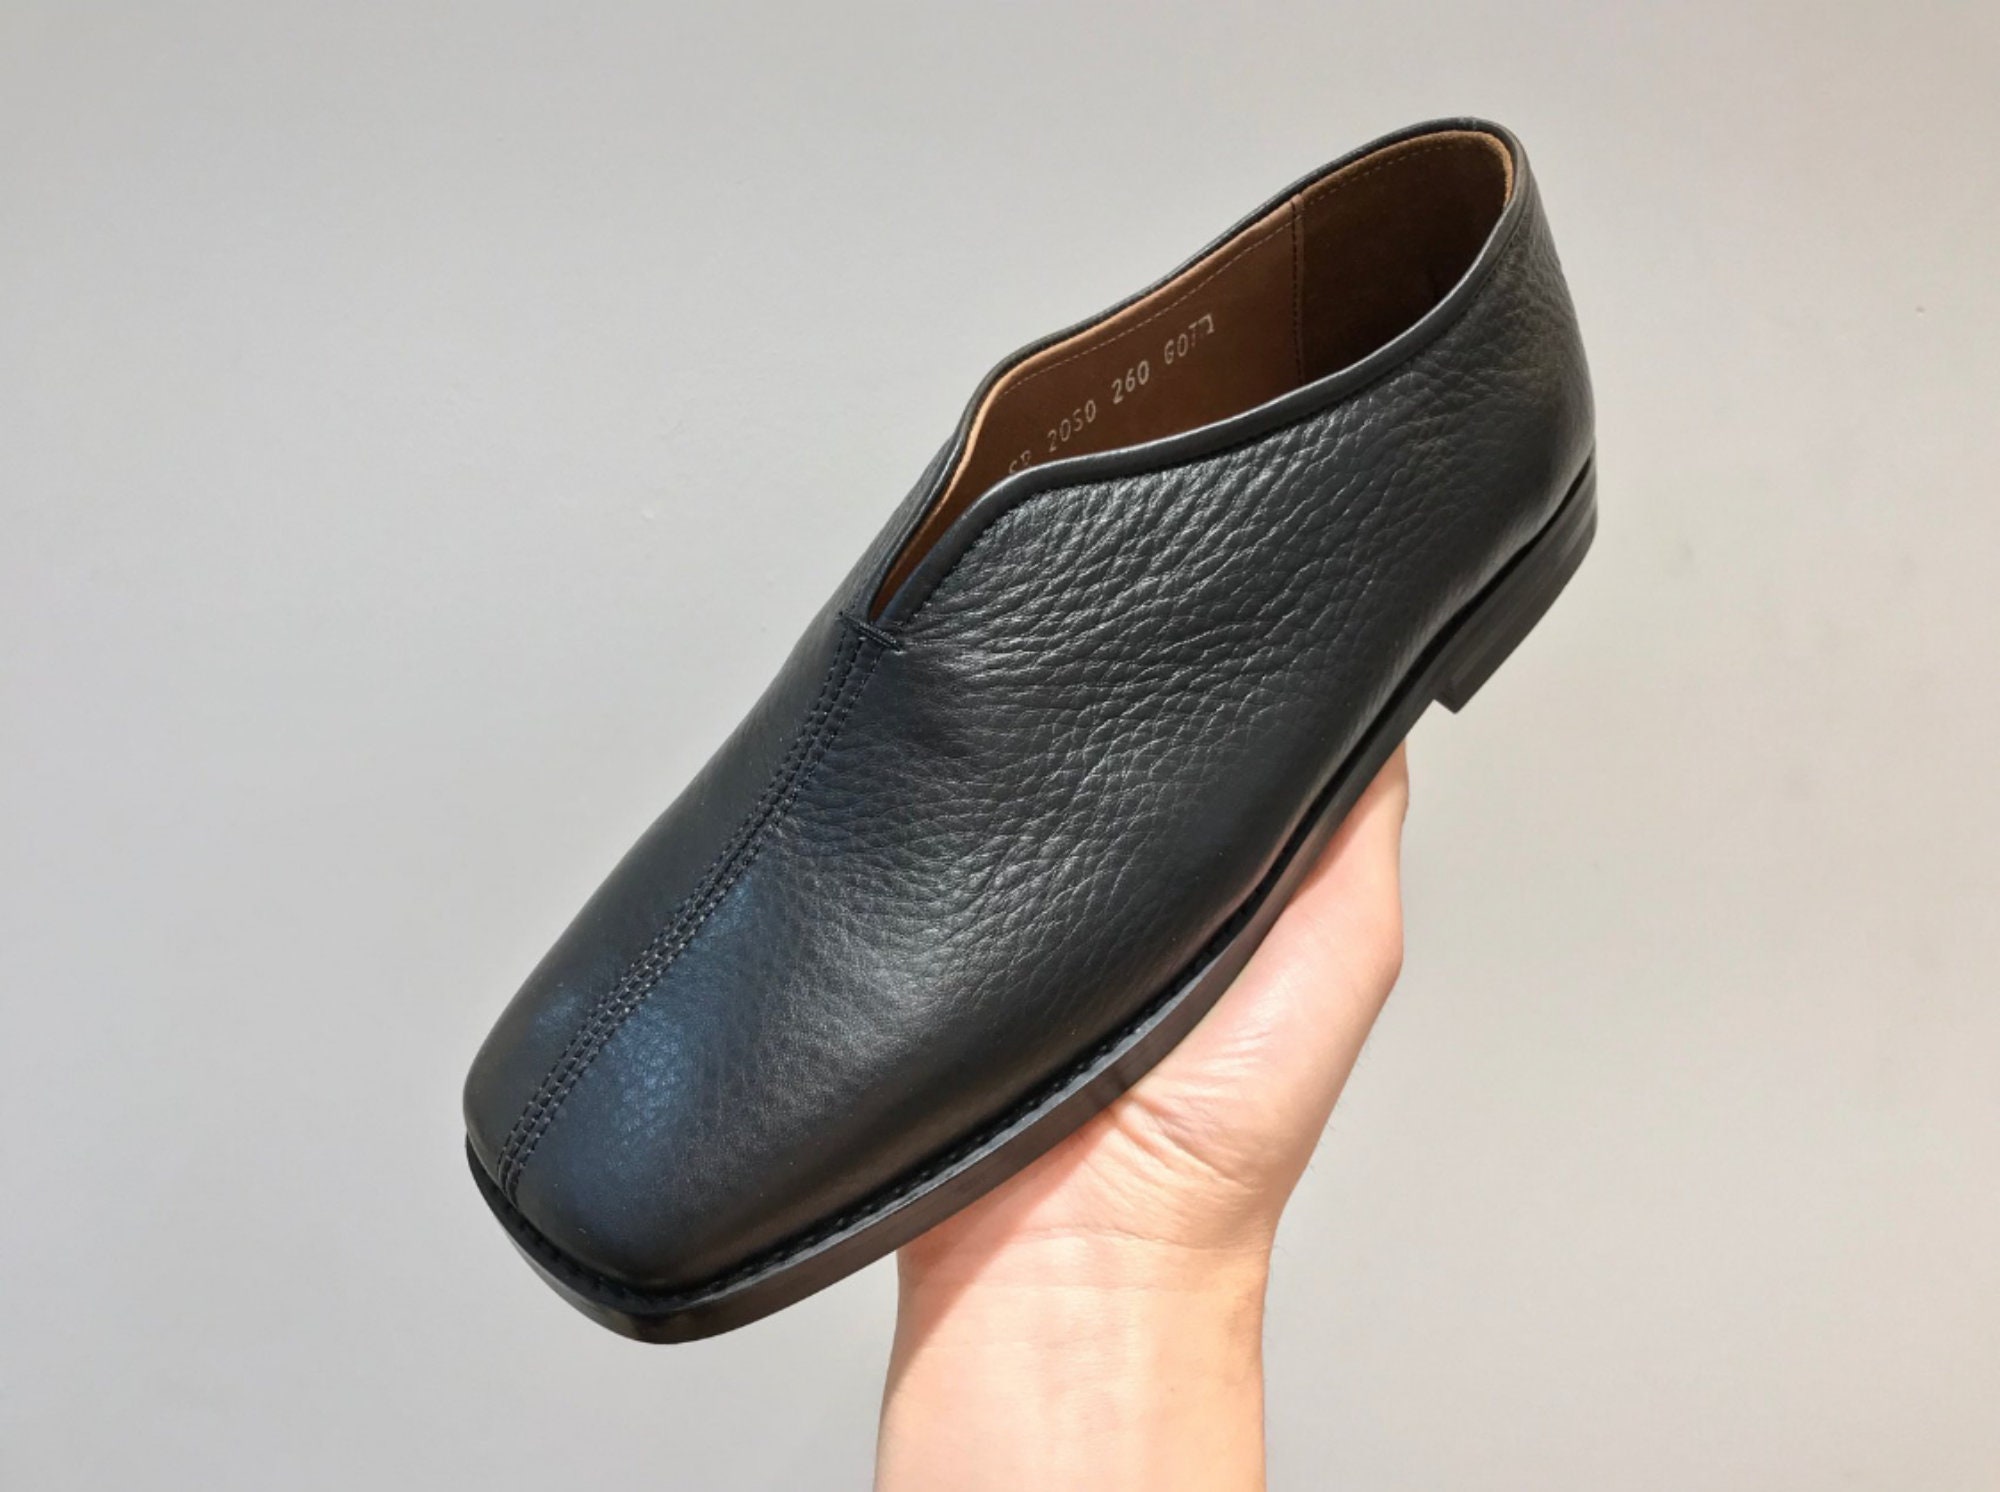 Handmade] Men Leather Chinese Slippers Slip On Shoes Babouche Maire Derby |  eBay